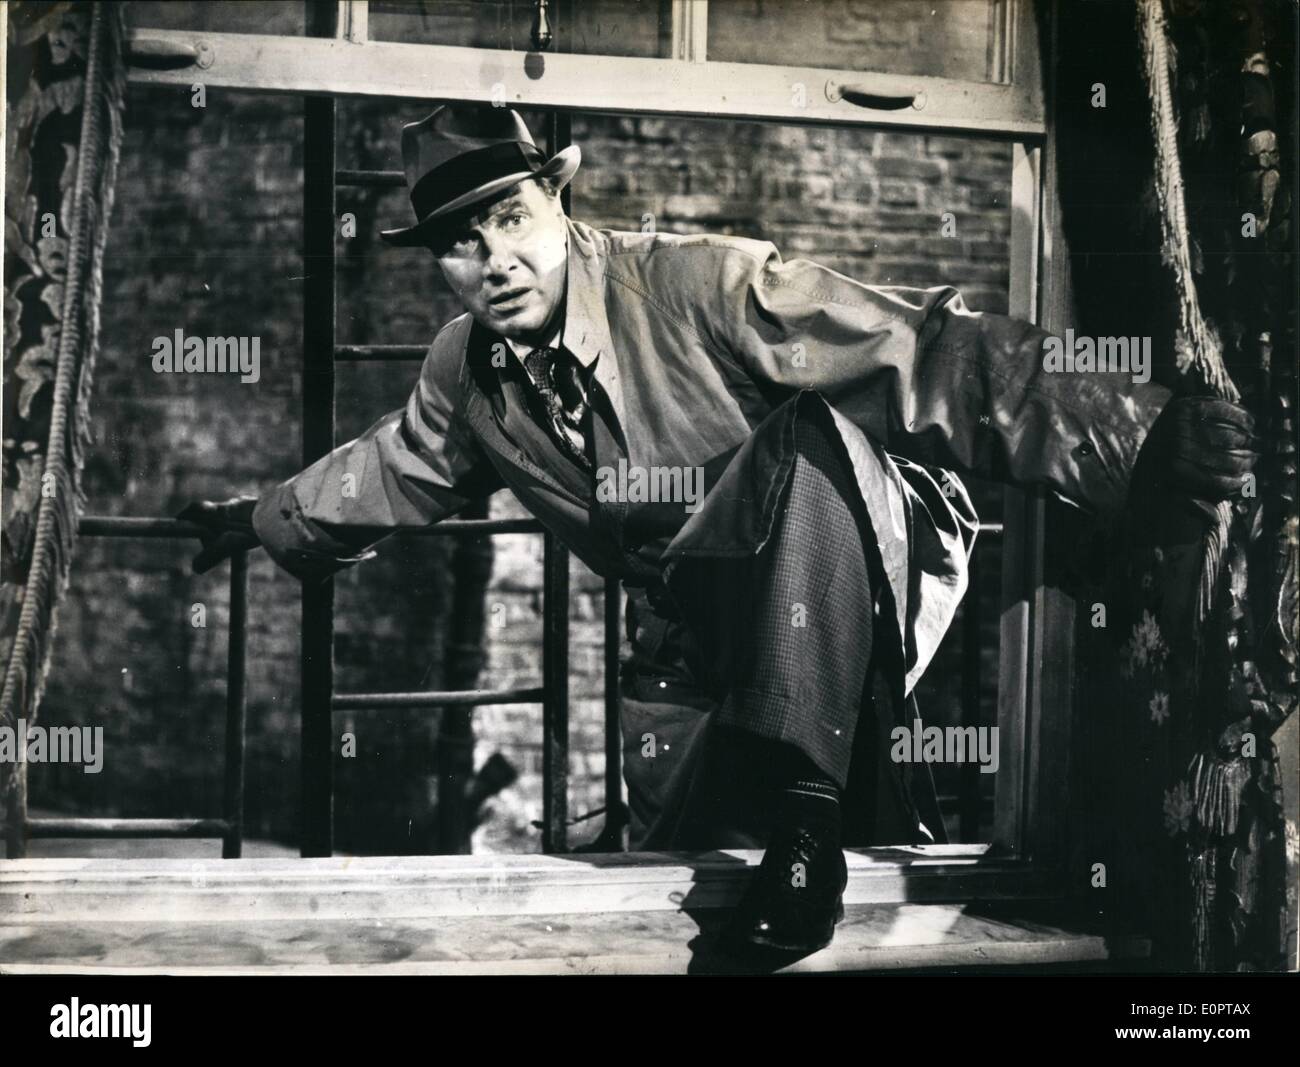 Dec. 12, 1956 - Spy for Germany: is the title of the new German movie-picture, which deals with the story of the German spy Erich Gimpel. Photo shows The German spy Erich Gimpel (MARTIN HELD) in a scene of the new film. Stock Photo